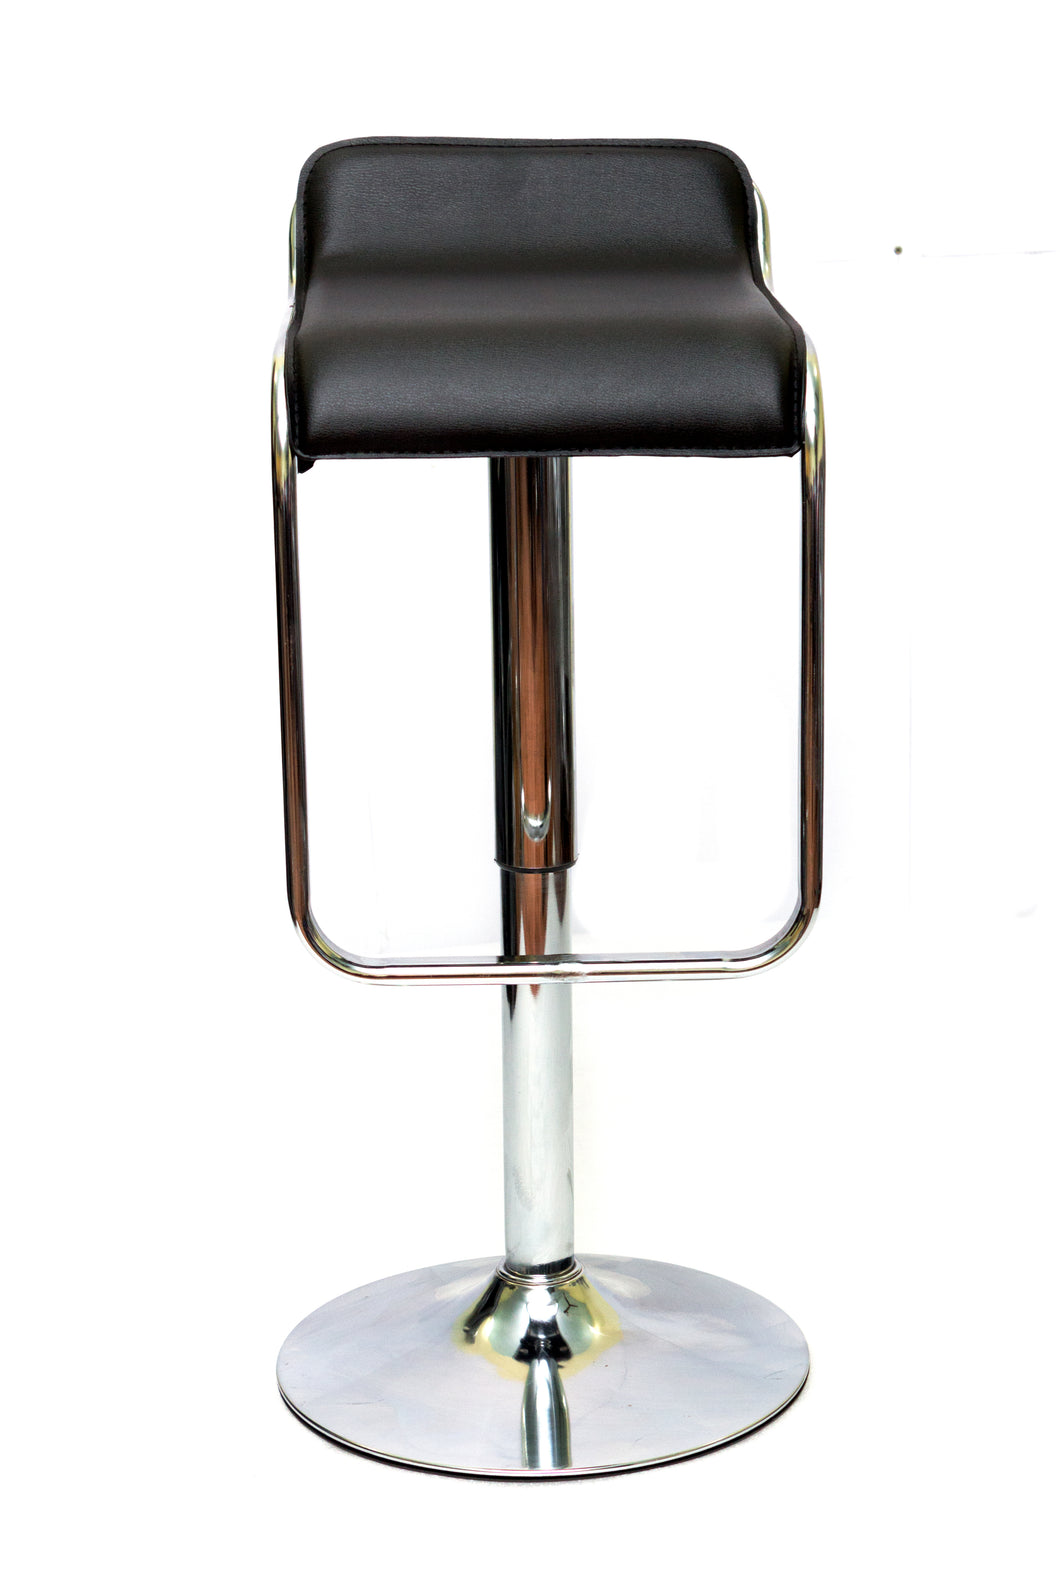 FC730-Office Cafe Stool Chair